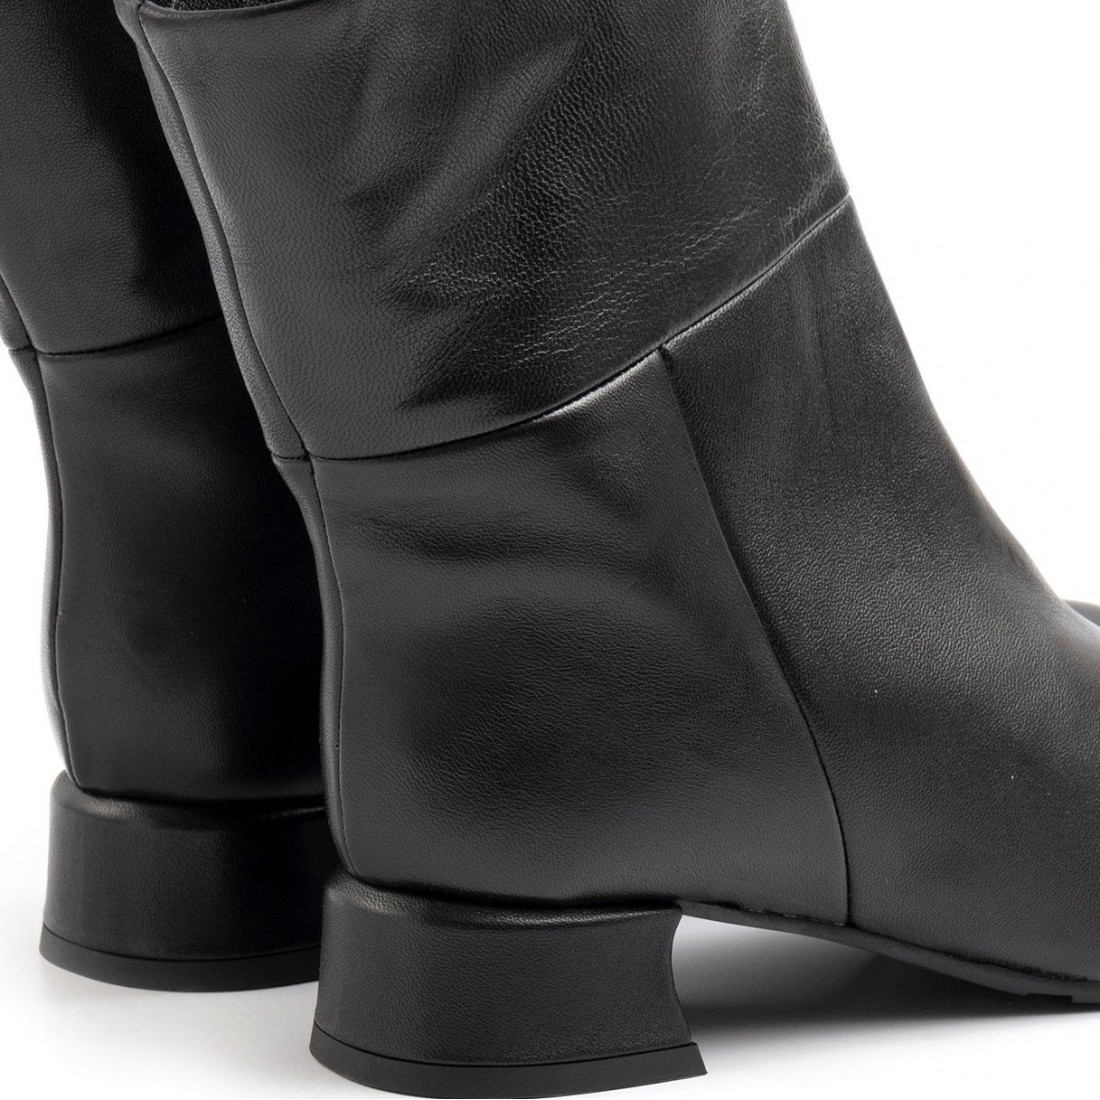 Black leather Startup booties with low heel